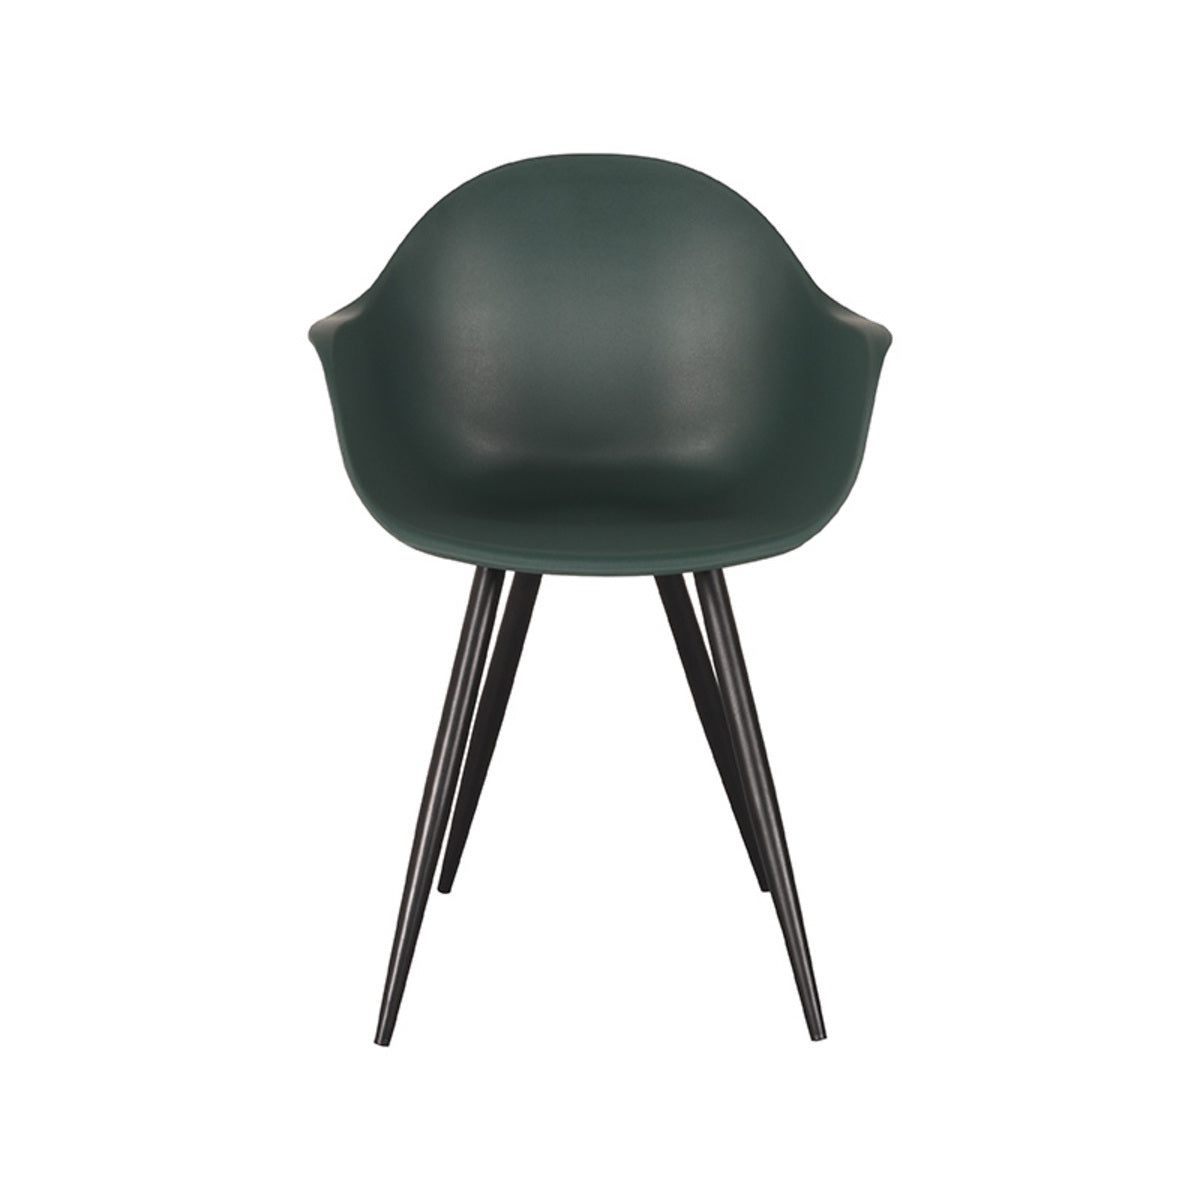 LABEL51 Dining room chair Luca - Green - Plastic | 2 pcs